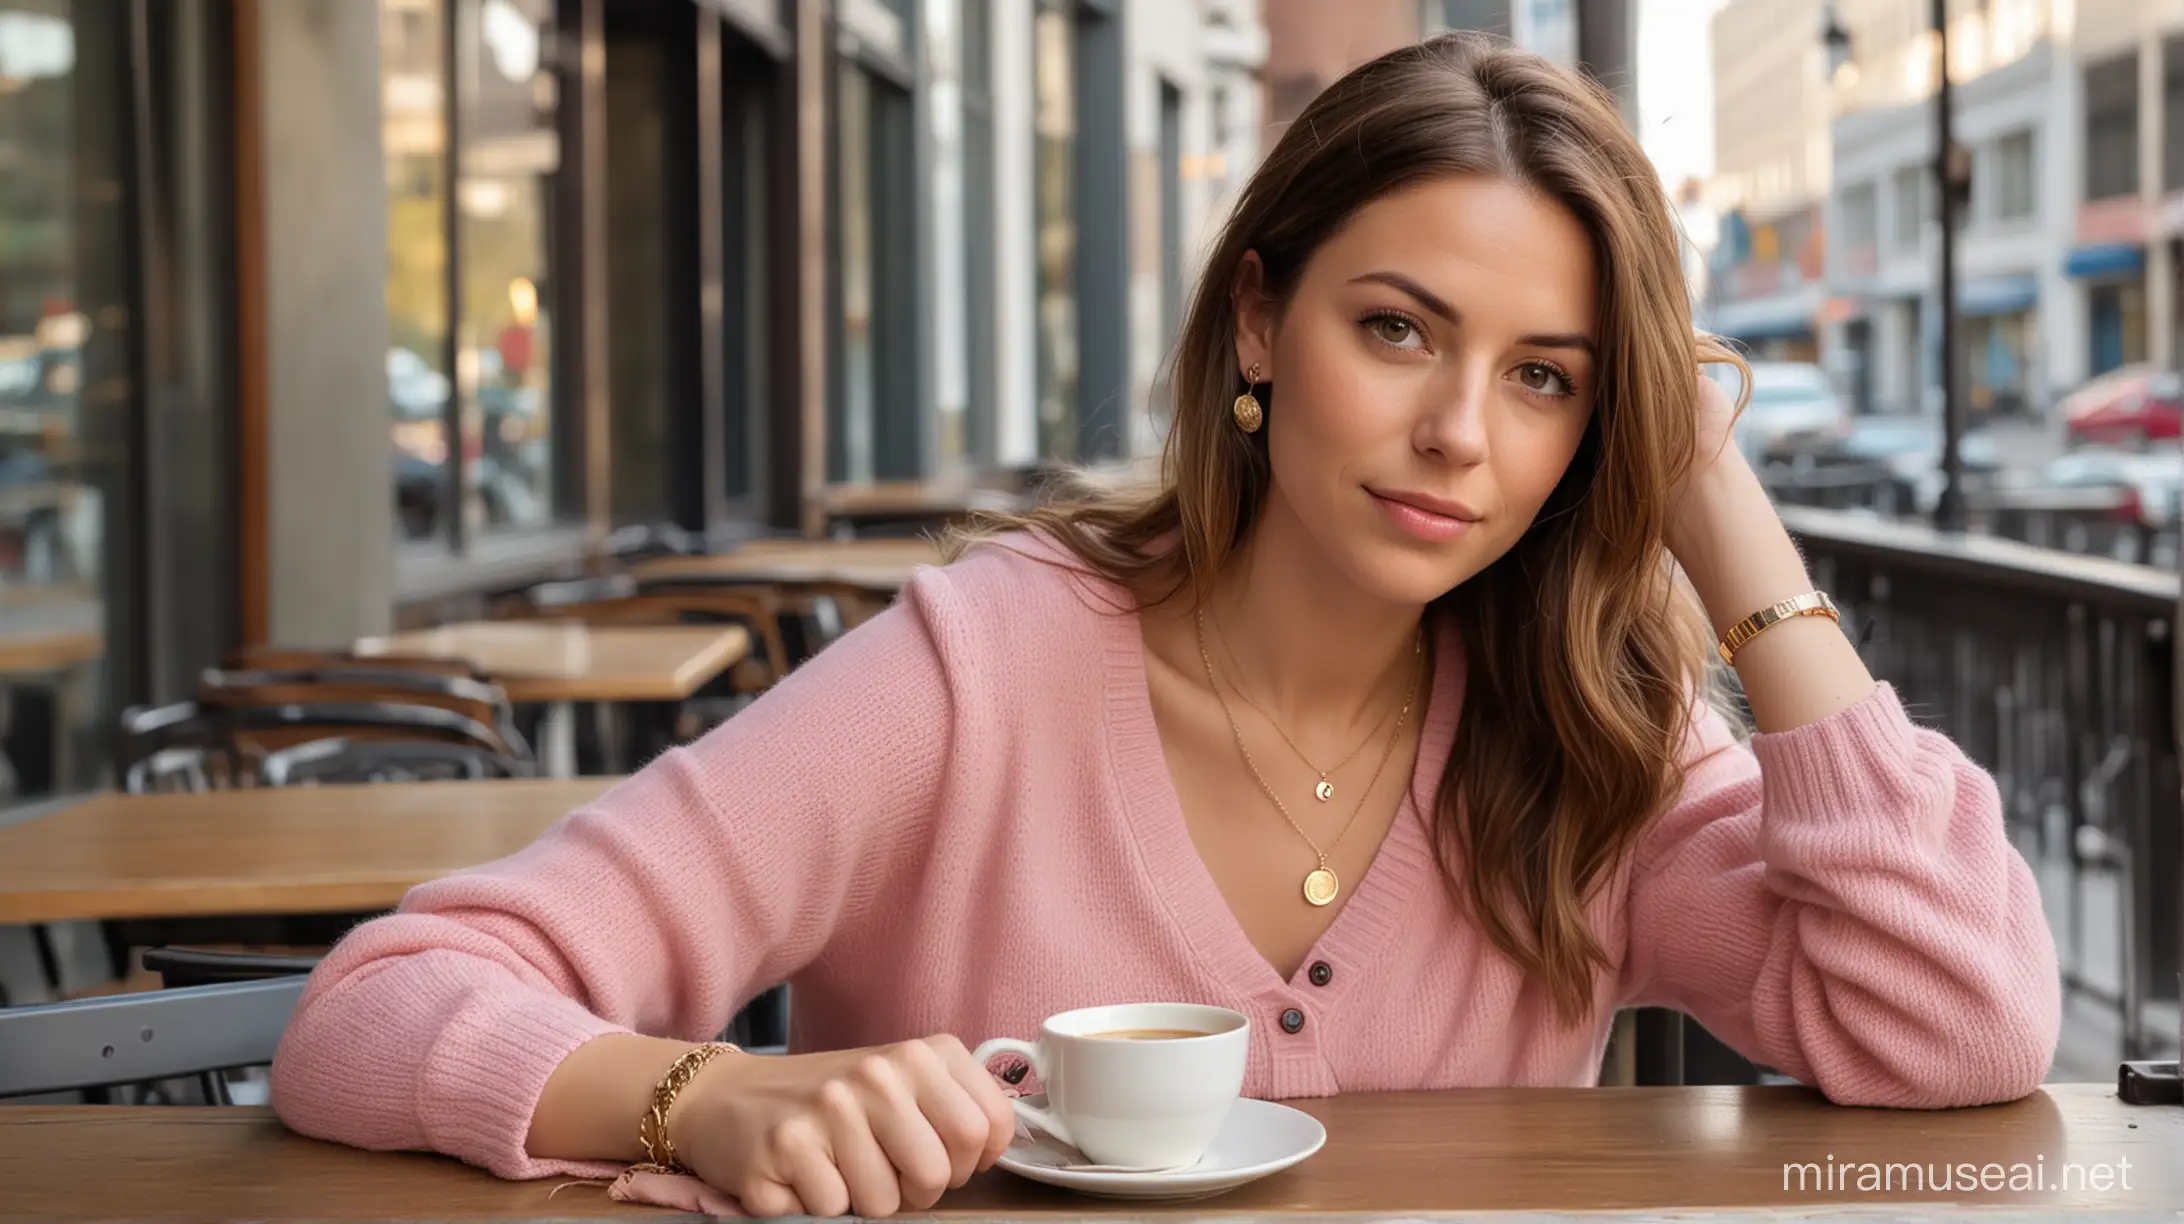 30 year old white woman with long brown hair hair parted to the right, wearing a gold necklace, pink button-up sweater, sitting down at a table with coffee in a cup in a saucer at an outdoor urban café background